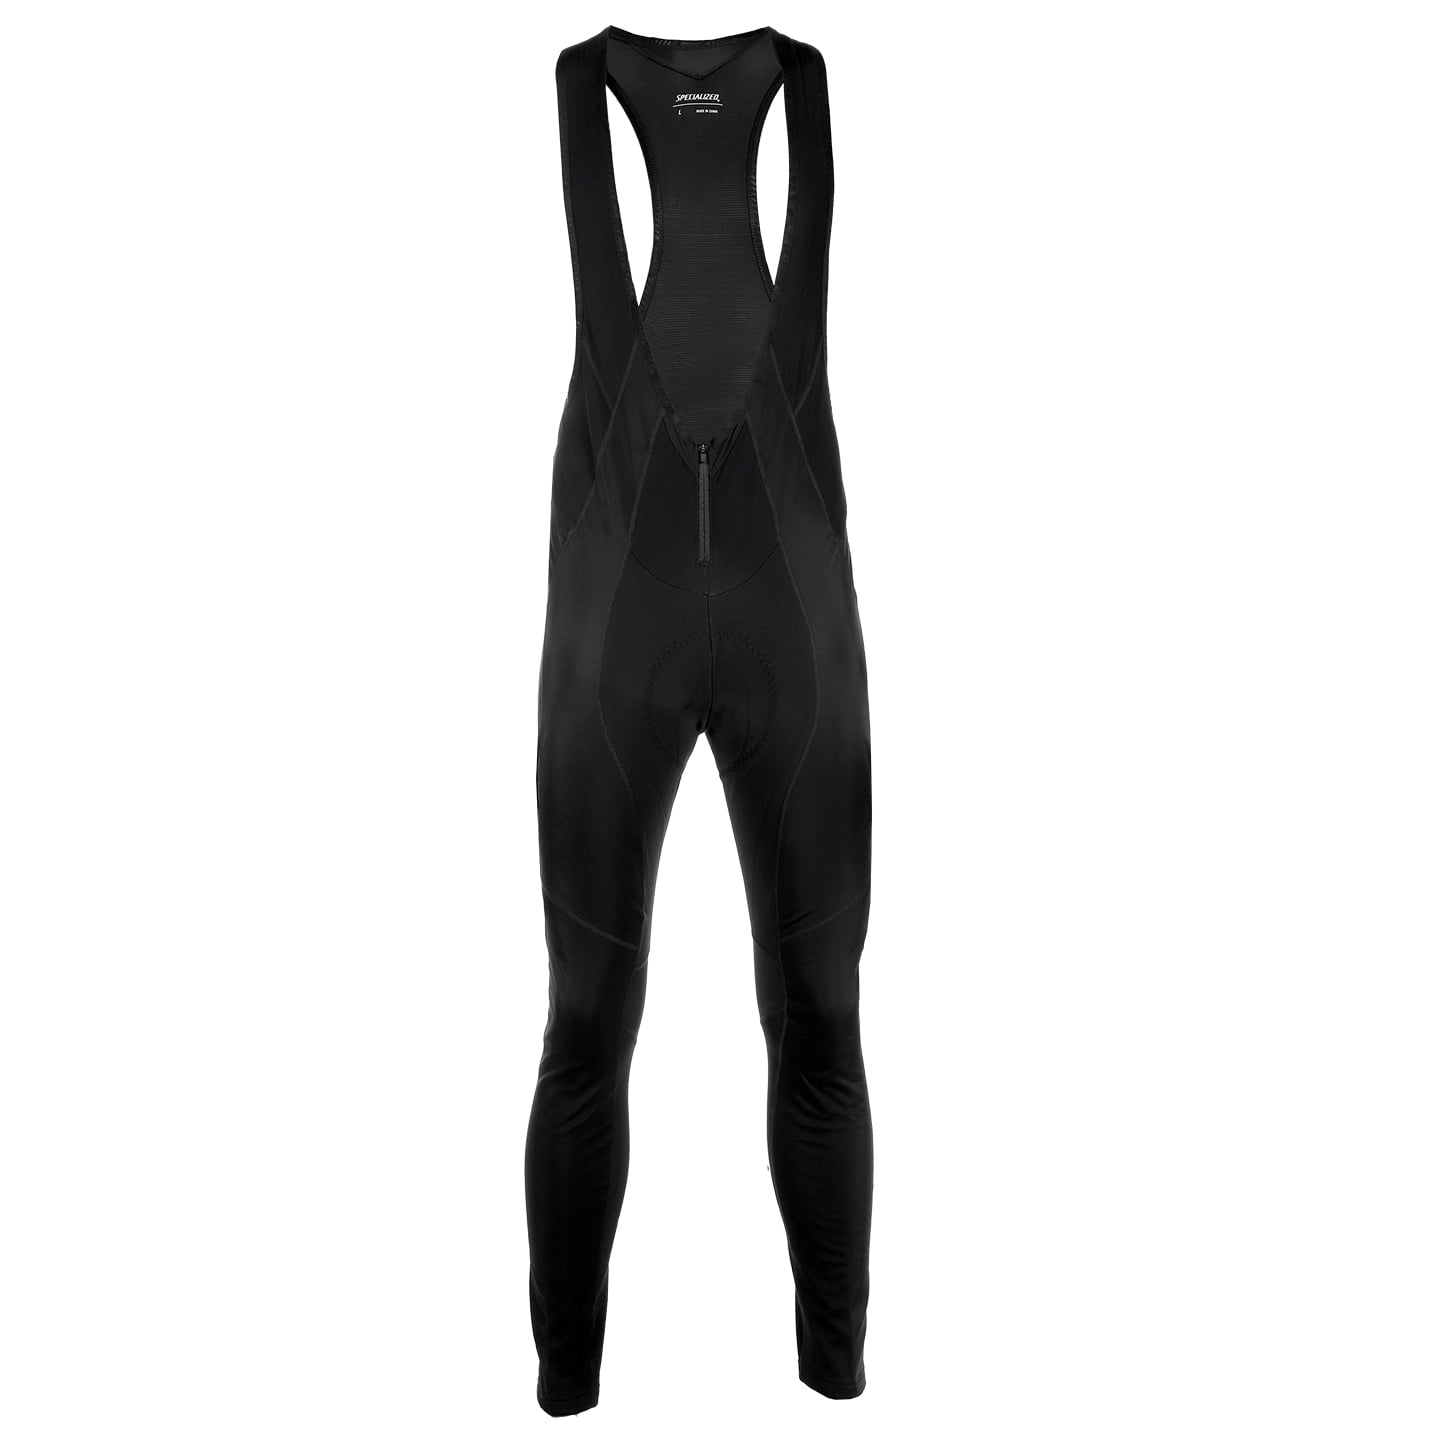 SPECIALIZED lange Tragerhose SL Expert Bib Tights Bib Tights, for men, size XL, Cycle tights, Cycling clothing